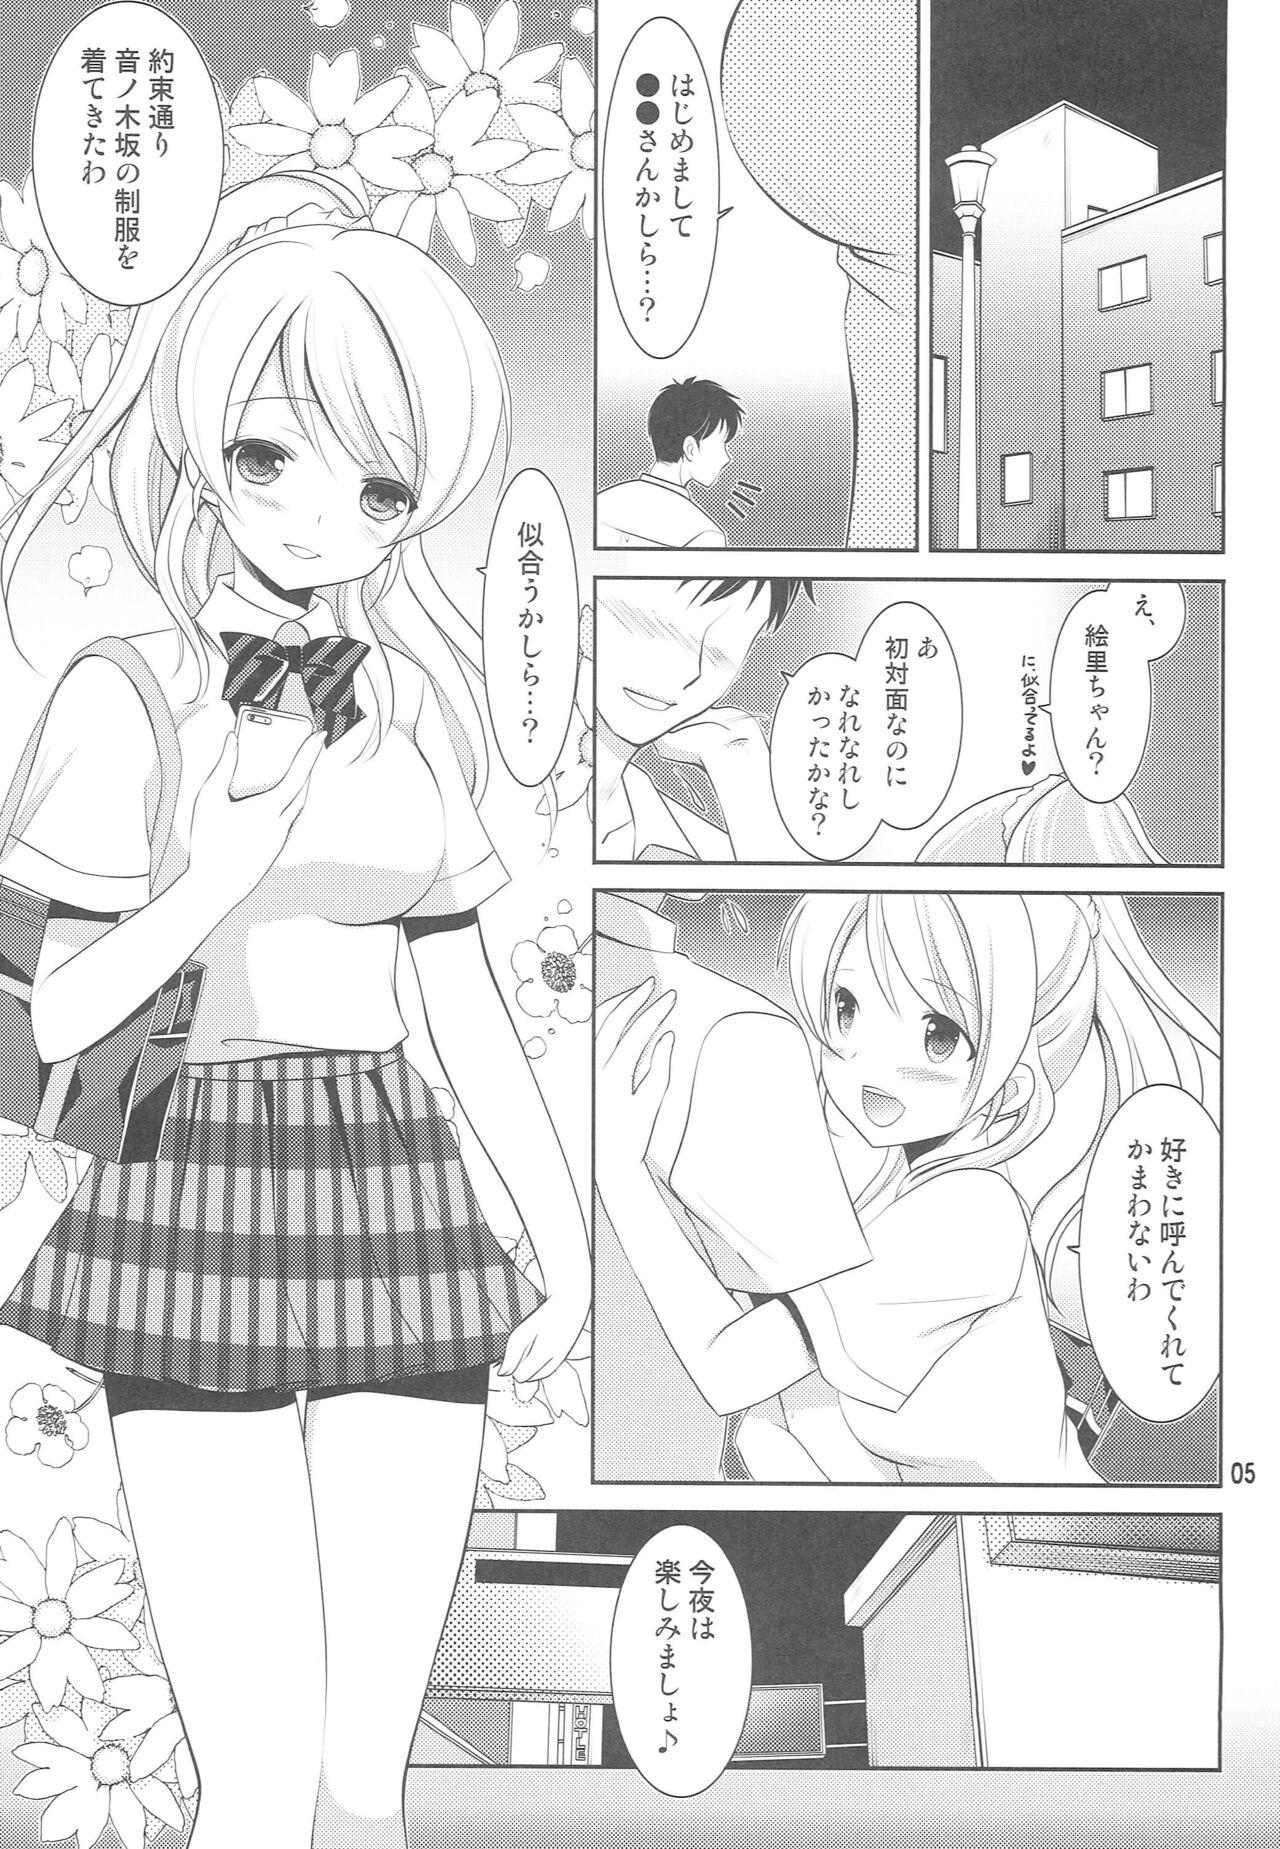 Officesex Himitsu no Elichika - Love live Sola - Page 4